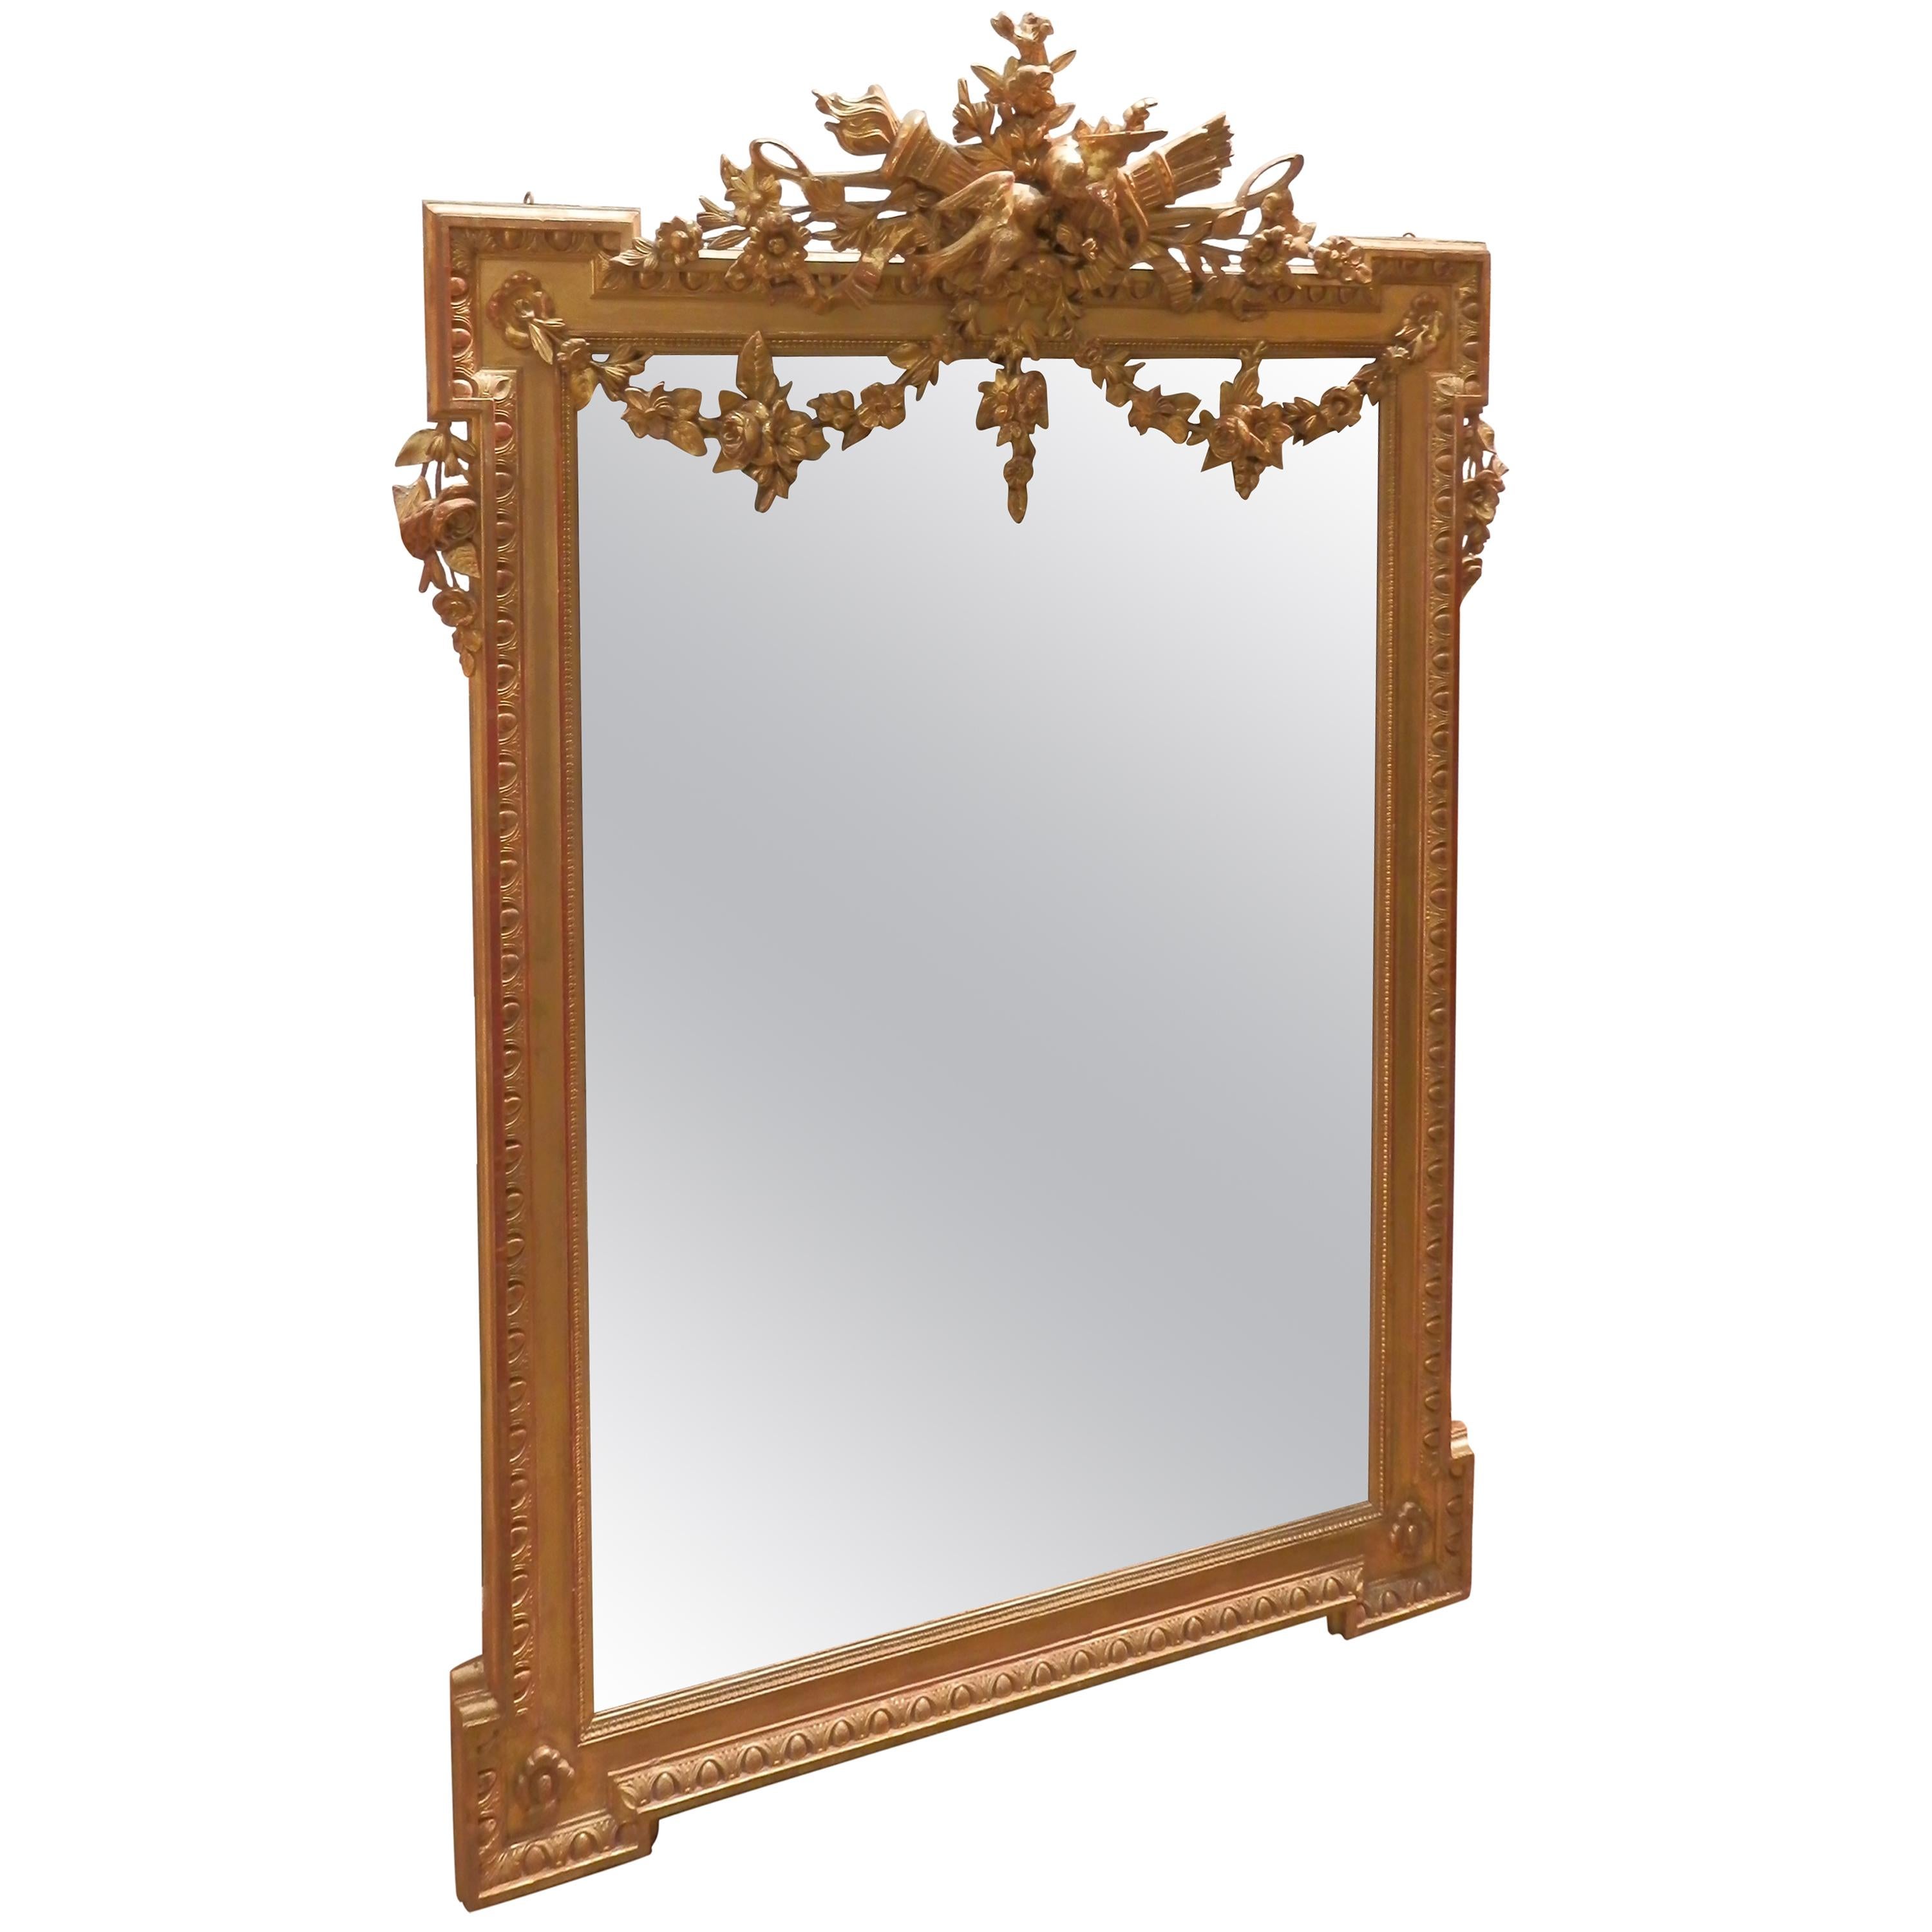 19th Century Fine French Gilt Carved Mirror with Fine Details